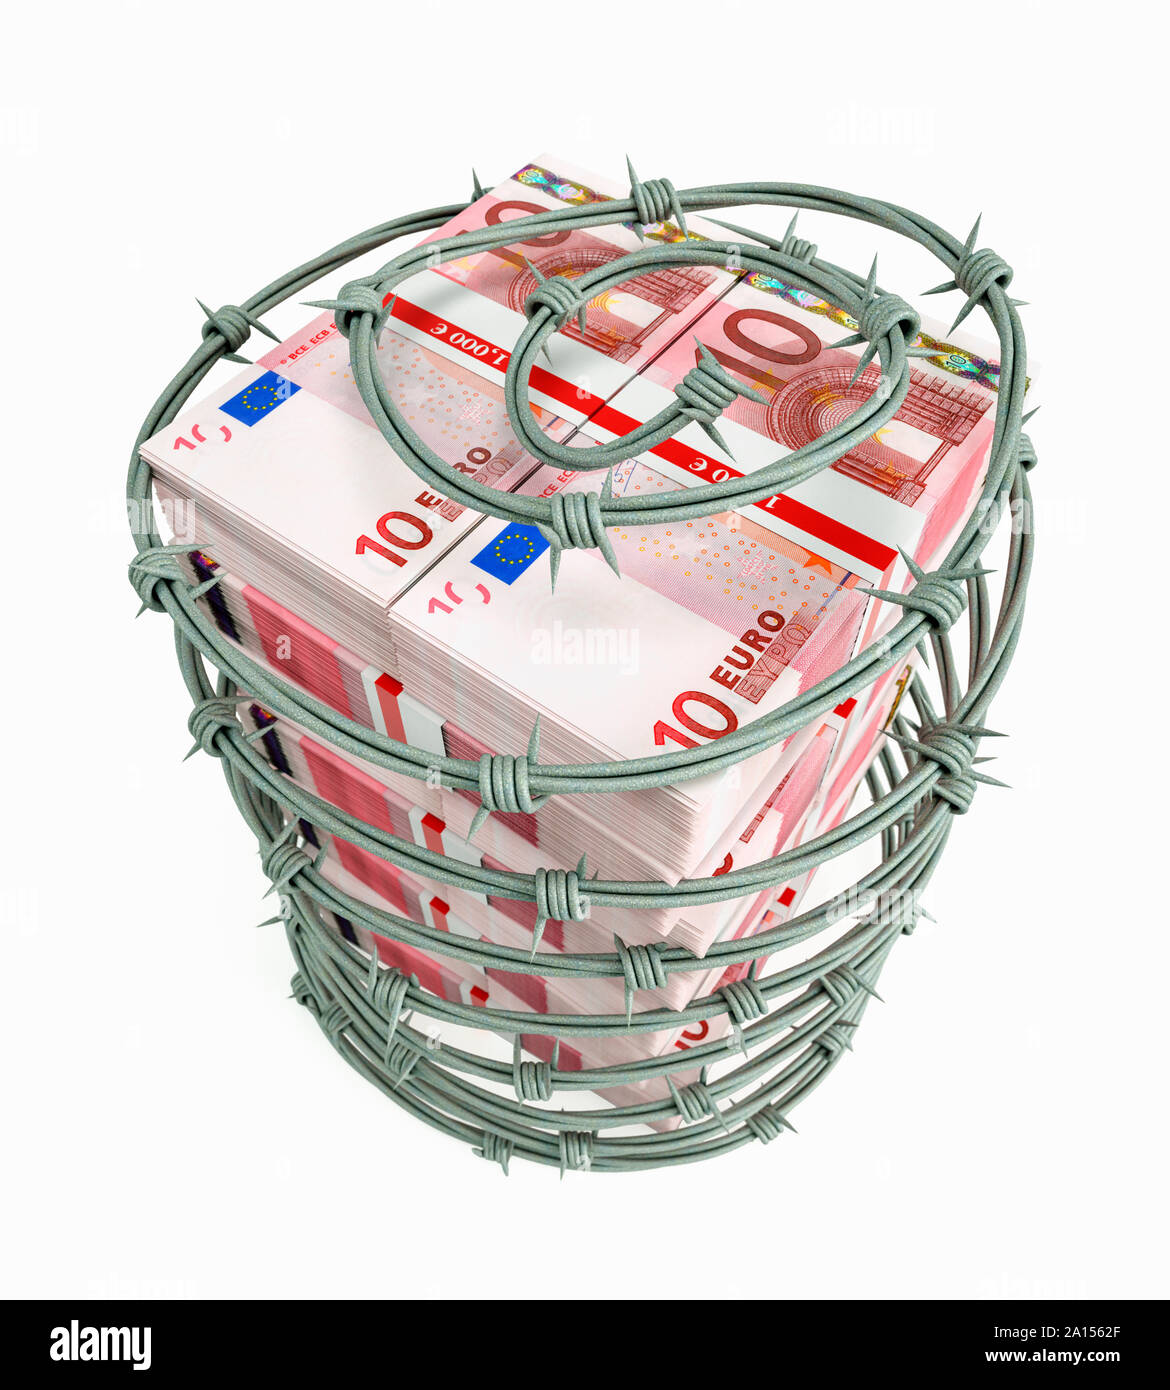 Euros banknotes stack wrapped in barbed wire – concept Stock Photo